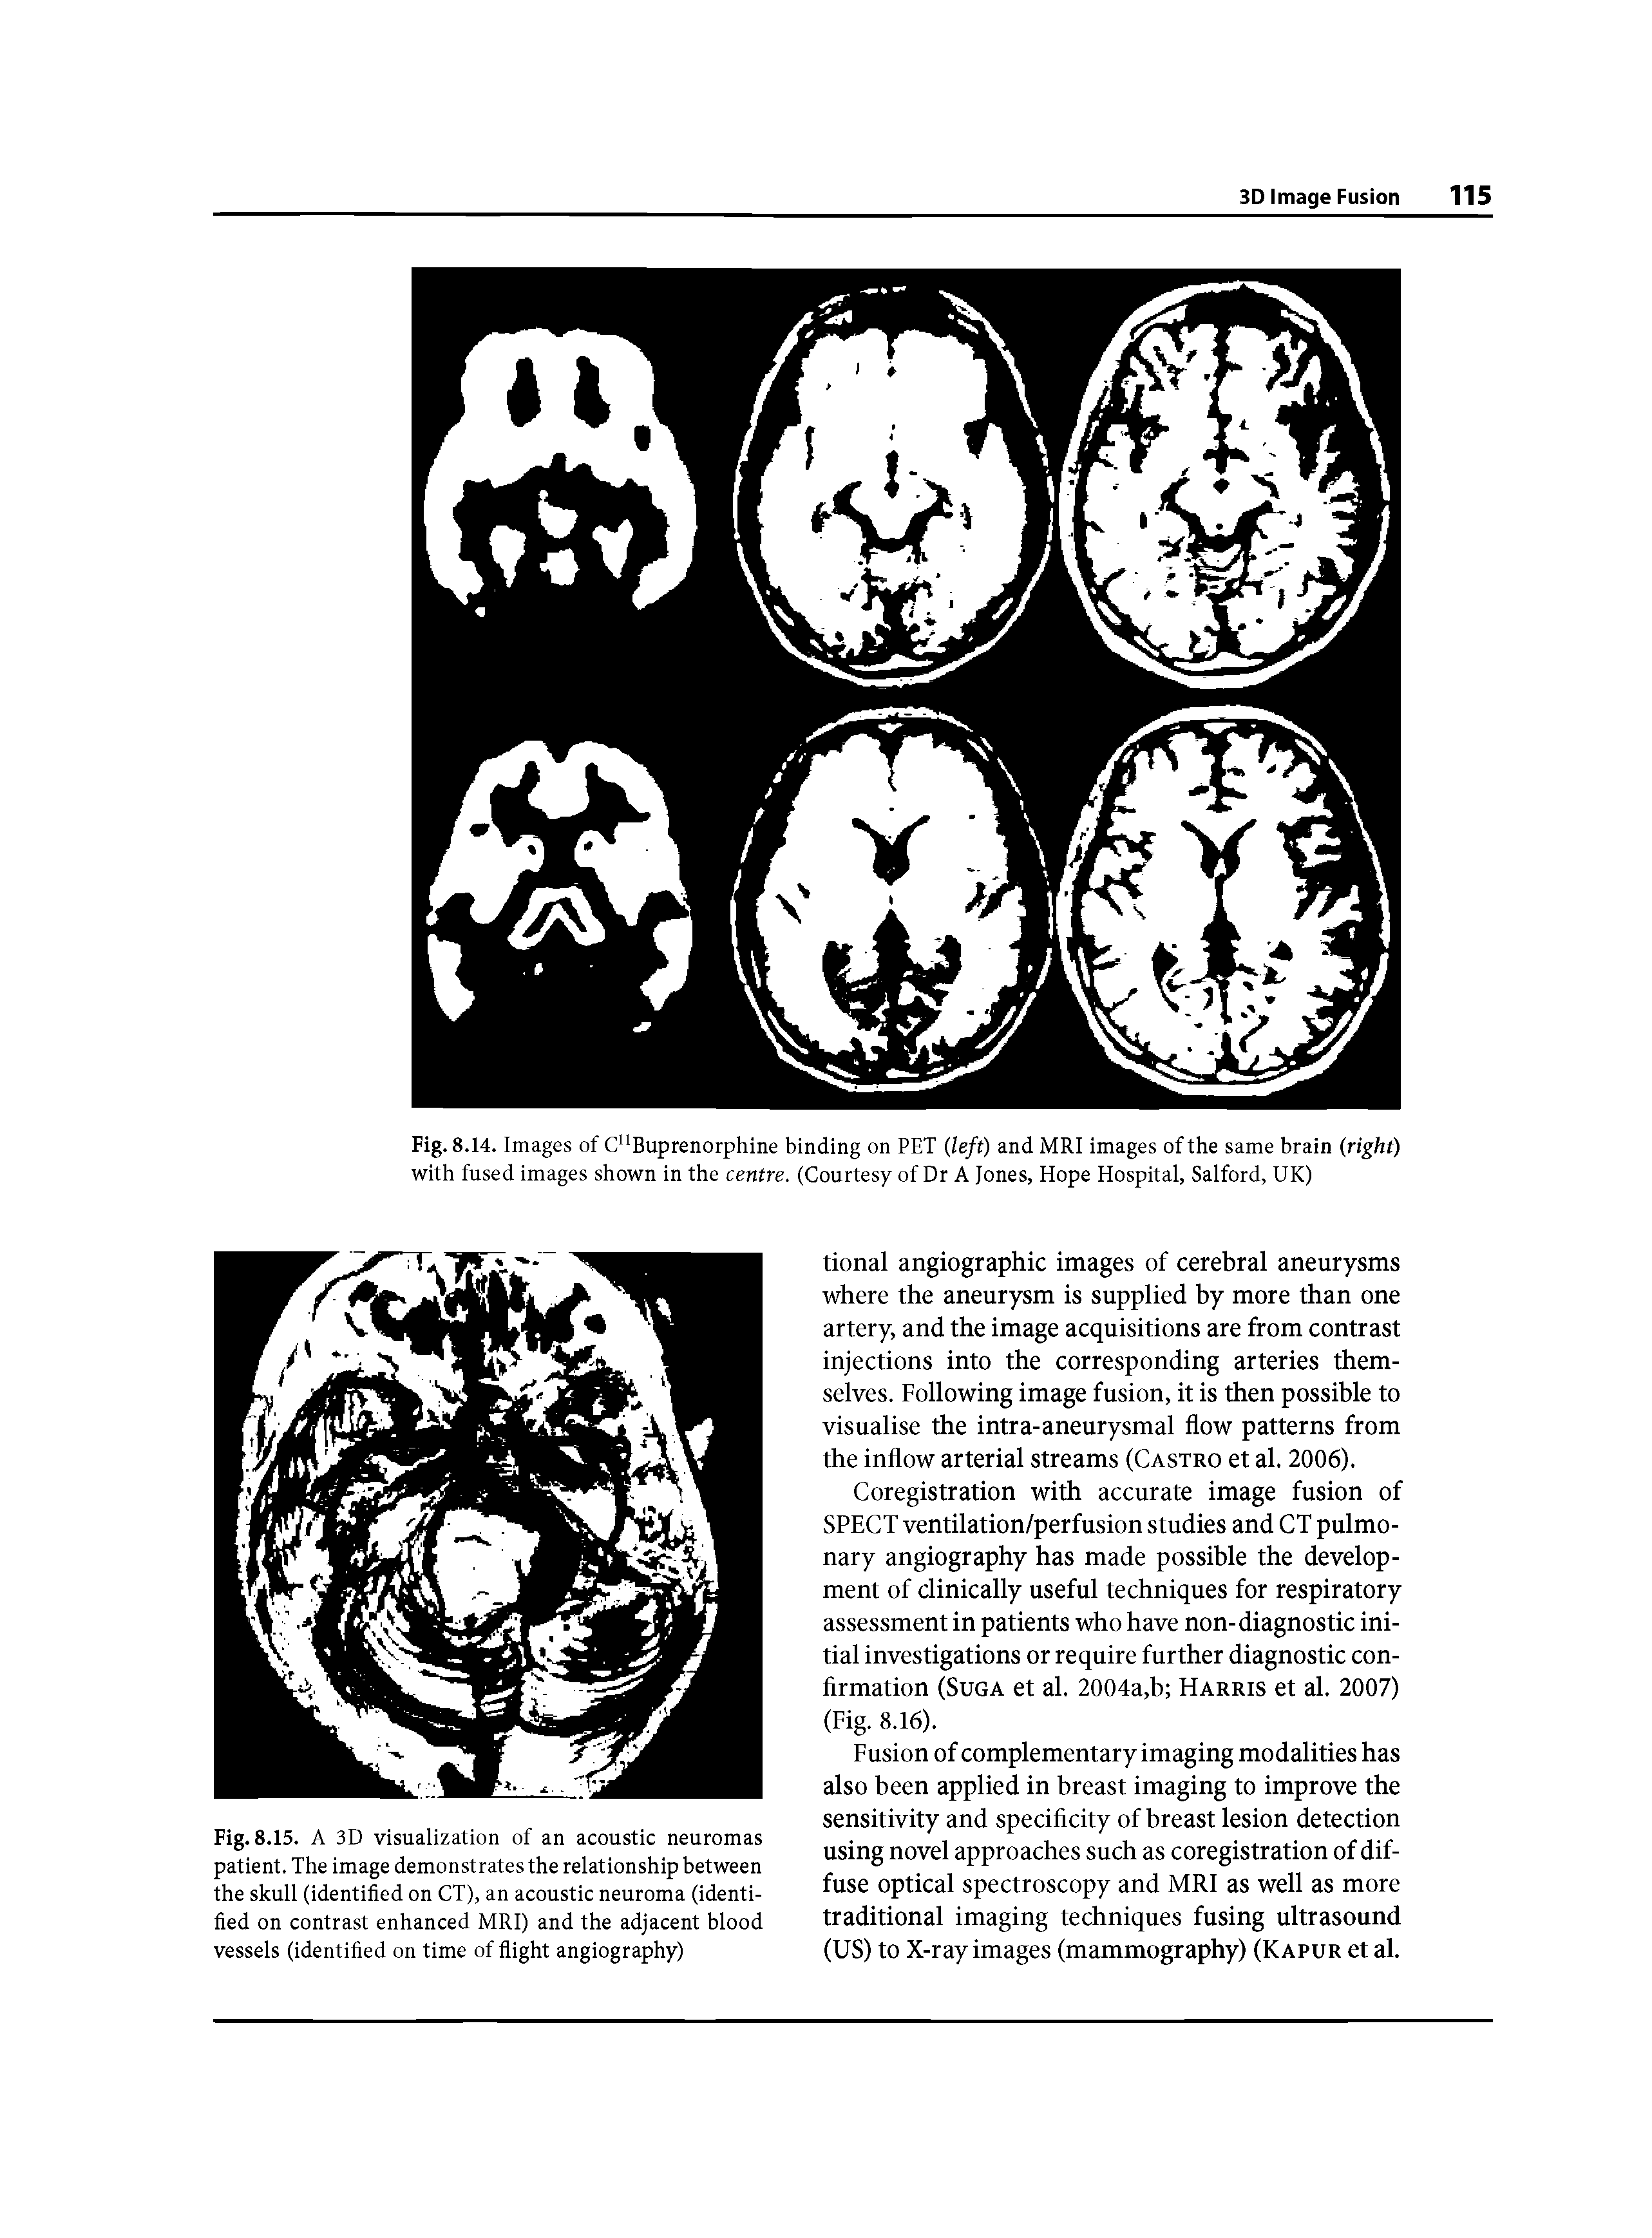 Fig. 8.14. Images of C"Buprenorphine binding on PET (left) and MRI images of the same brain (right) with fused images shown in the centre. (Courtesy of Dr A Jones, Hope Hospital, Salford, UK)...